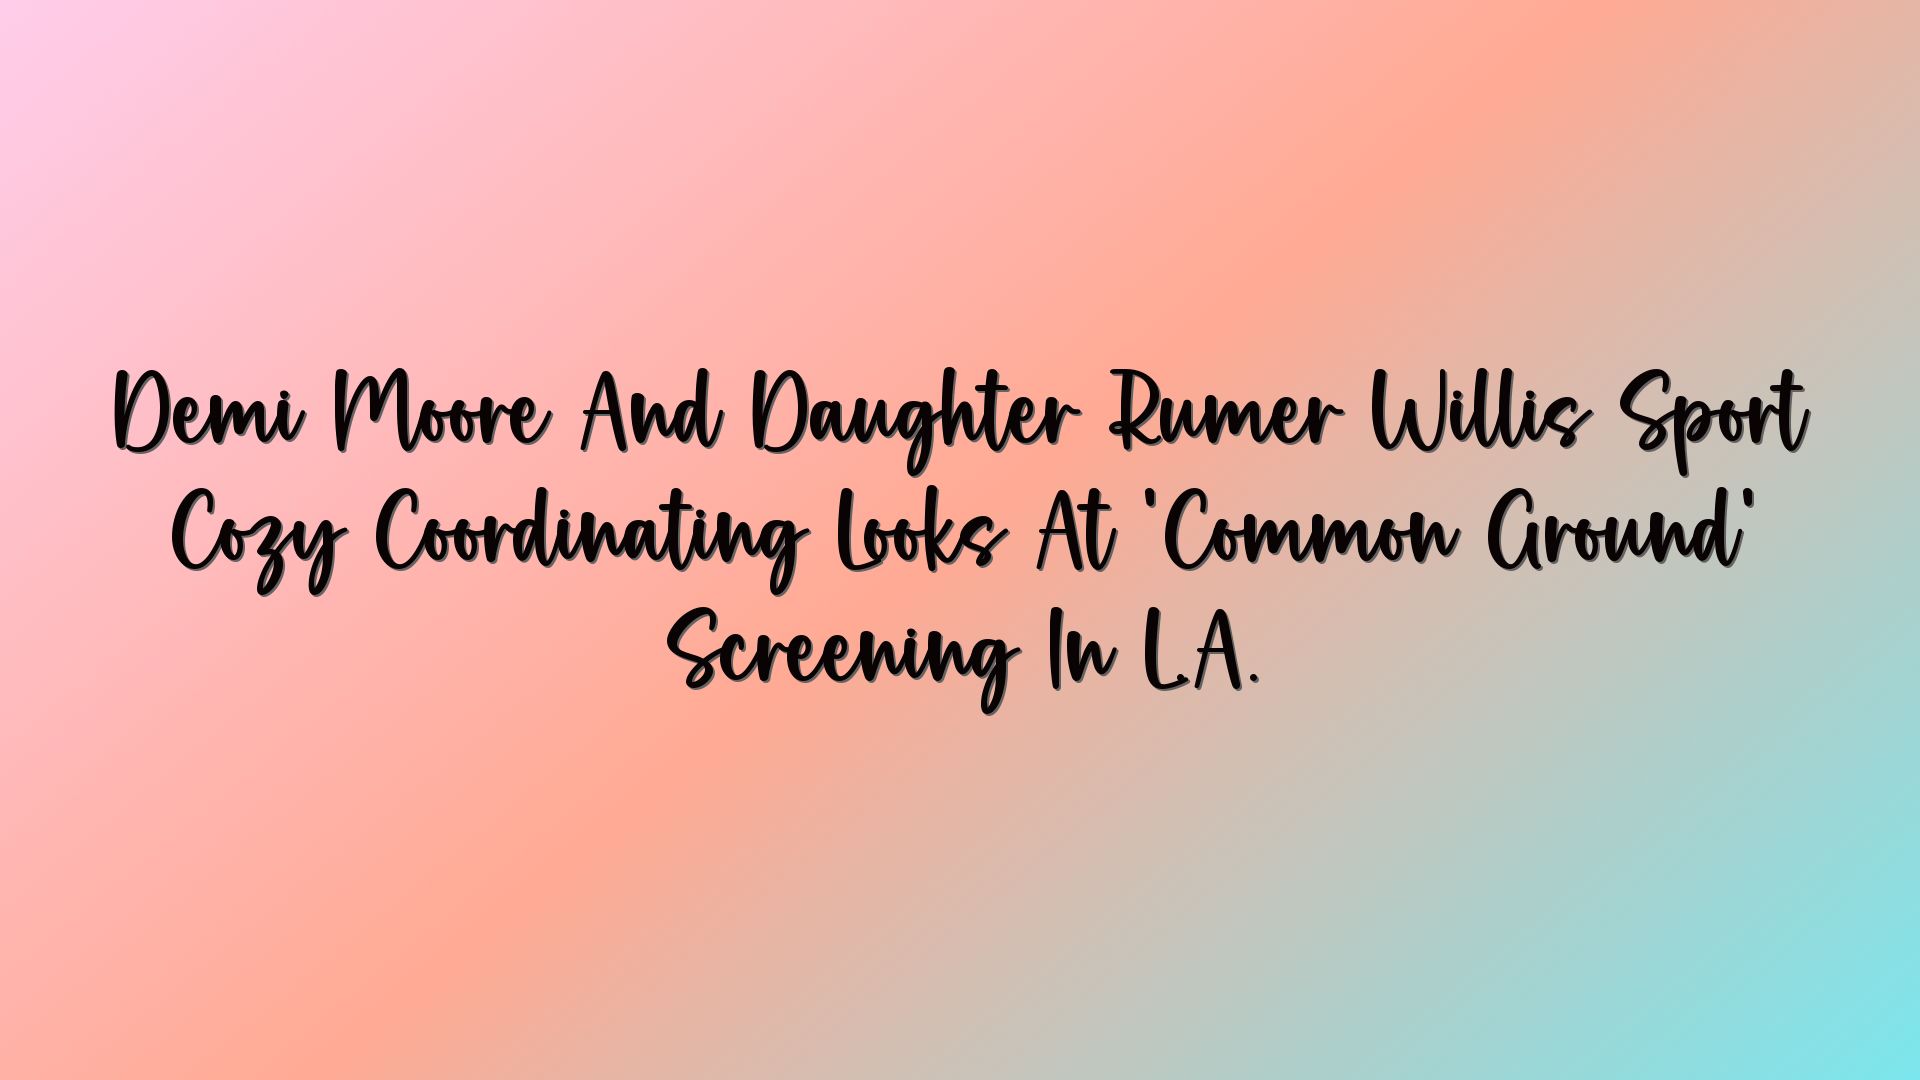 Demi Moore And Daughter Rumer Willis Sport Cozy Coordinating Looks At ‘Common Ground’ Screening In L.A.